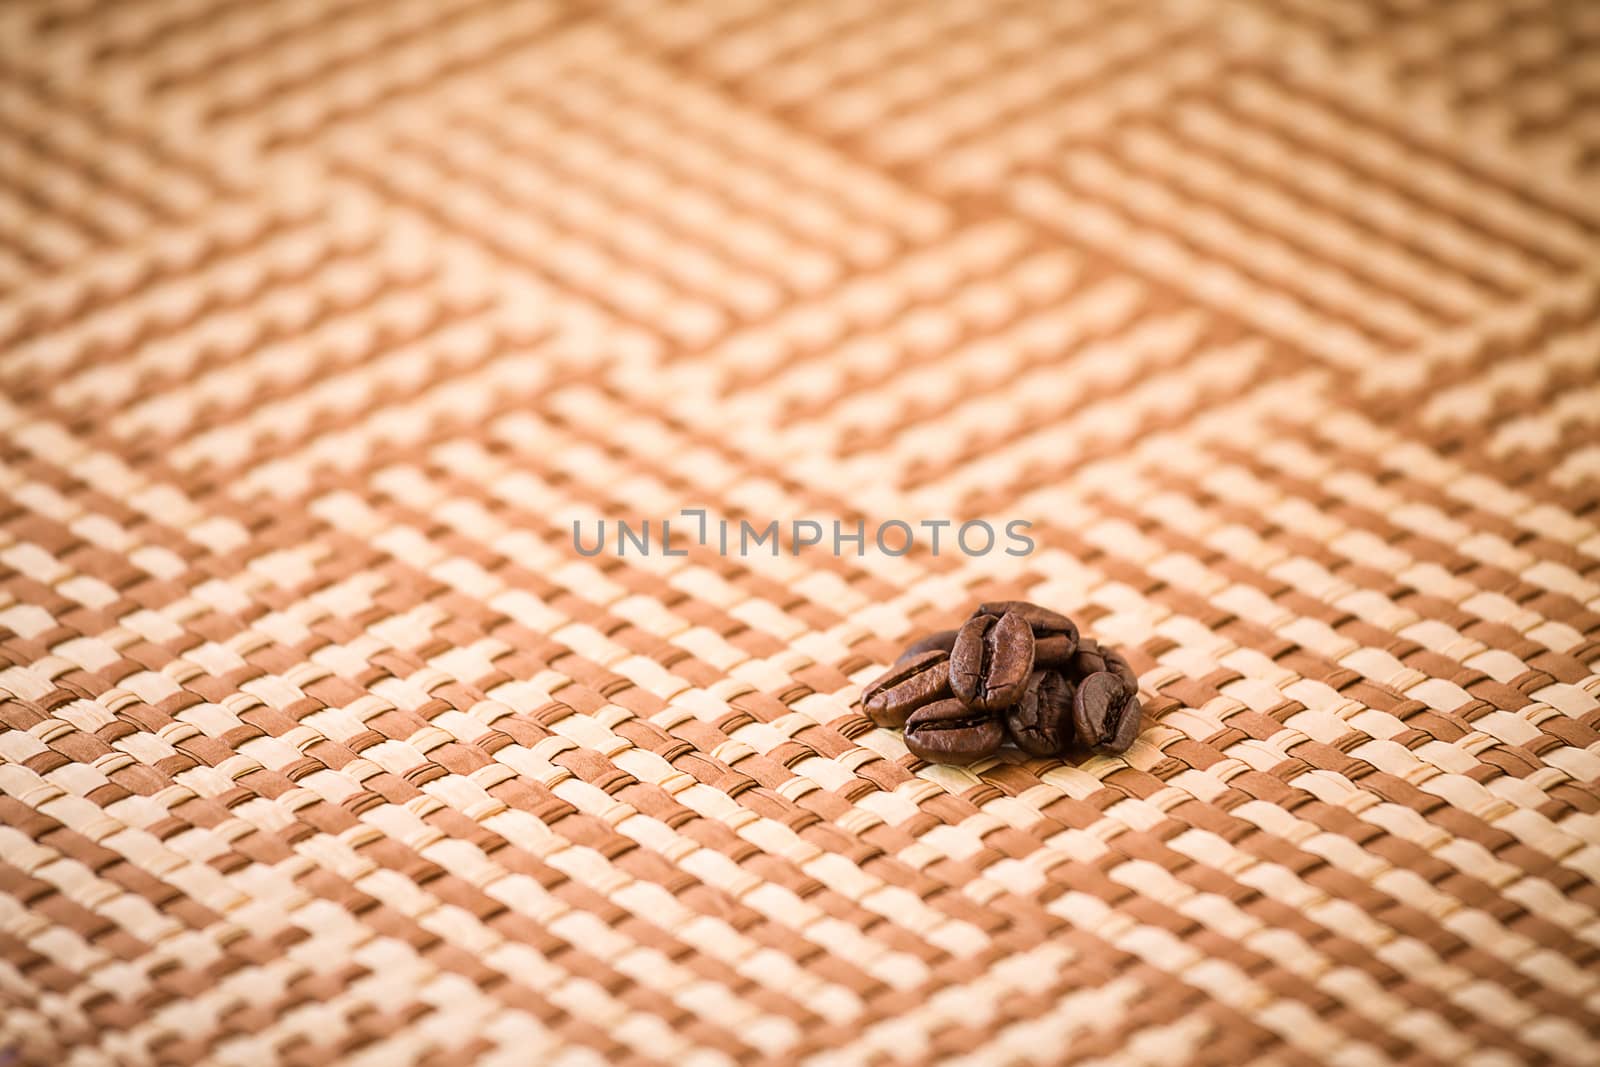 Some coffee beans on a squared tablecloth